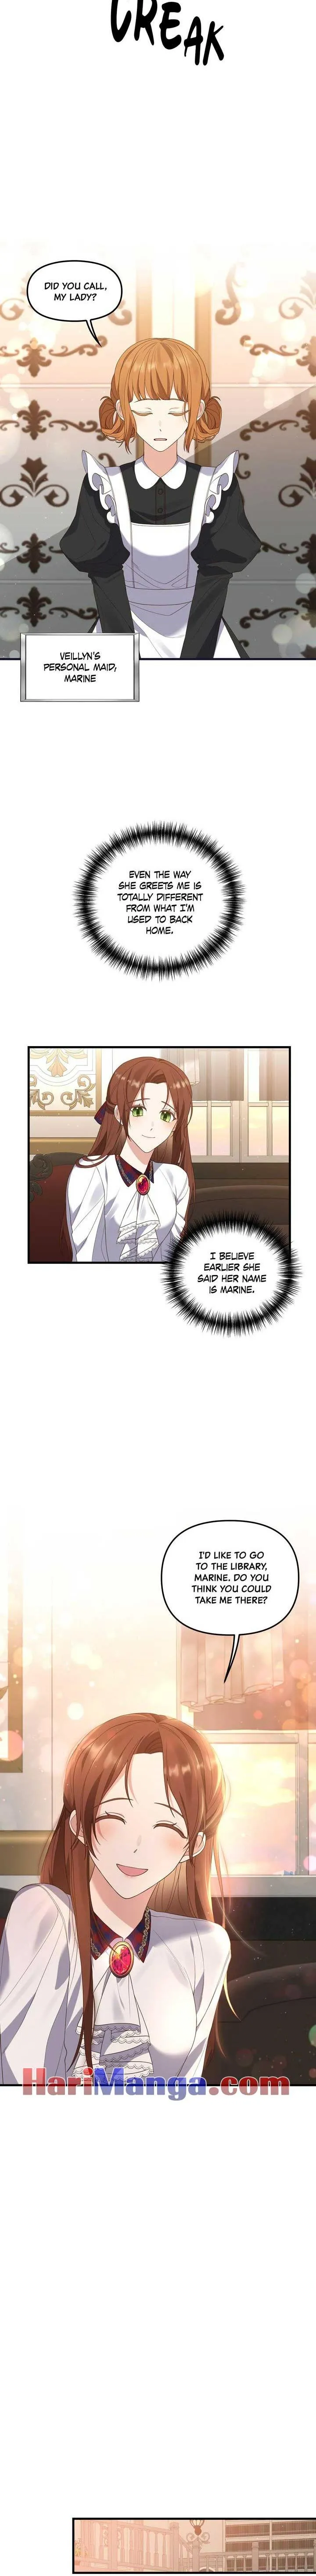 I’m Engaged to an Obsessive Male Lead - Chapter 4 - Coffee Manga